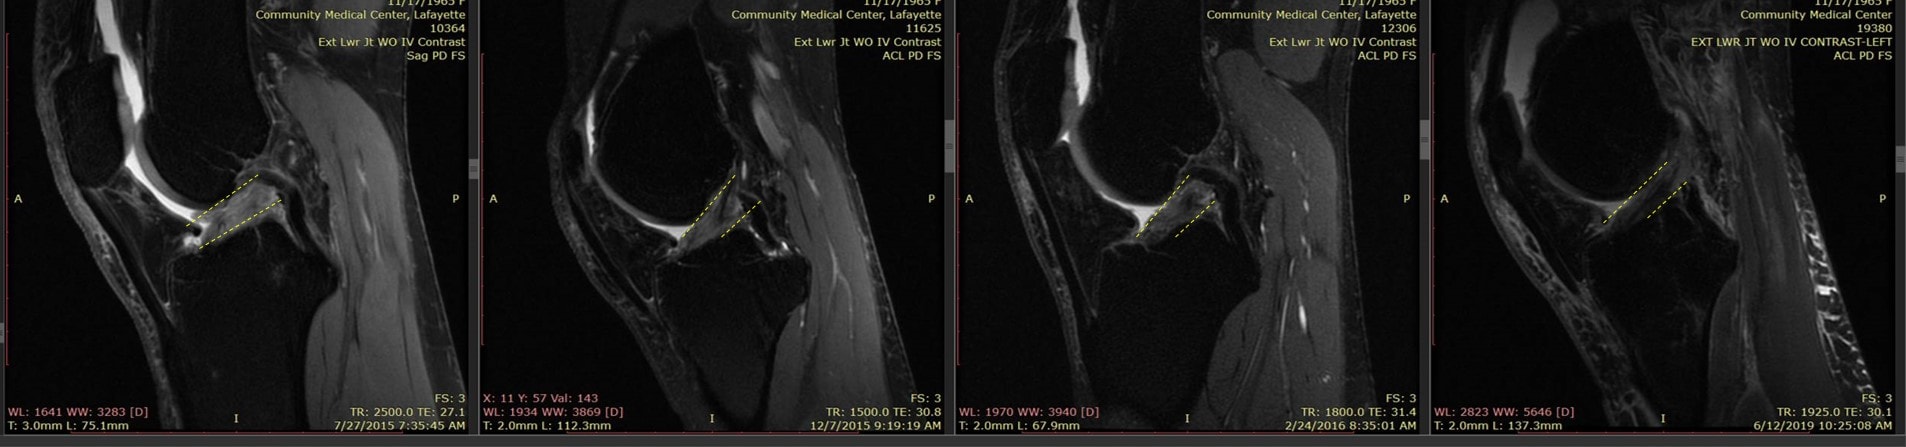 ACL healing with stem cells